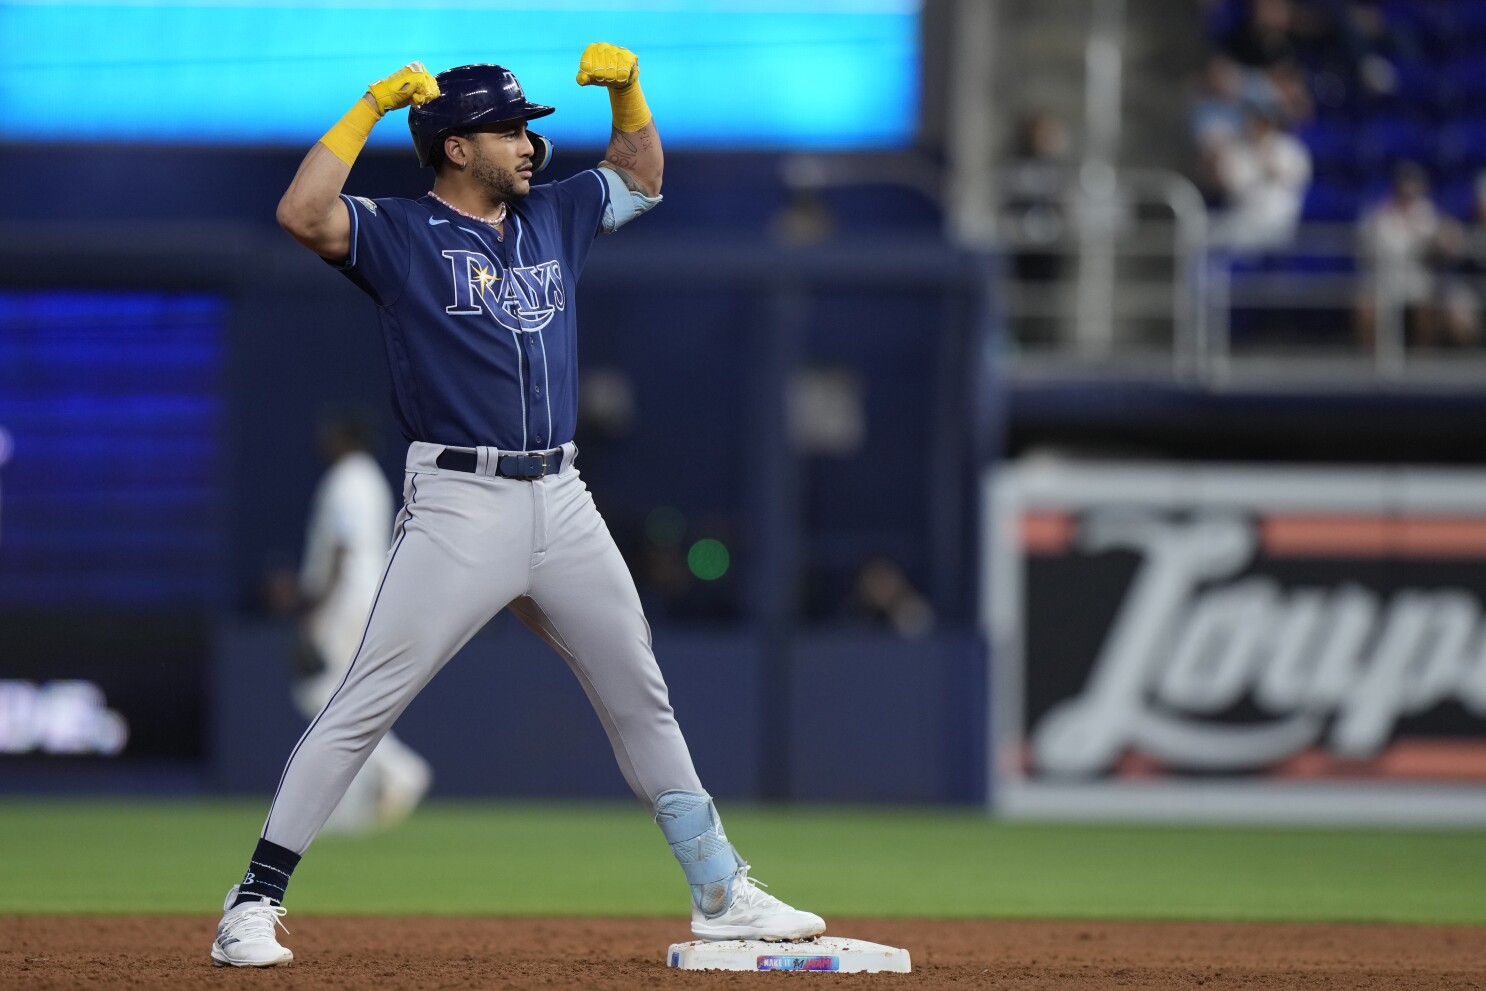 Isaac Paredes (2 HRs, 6 RBIs) blasts Rays past Rangers